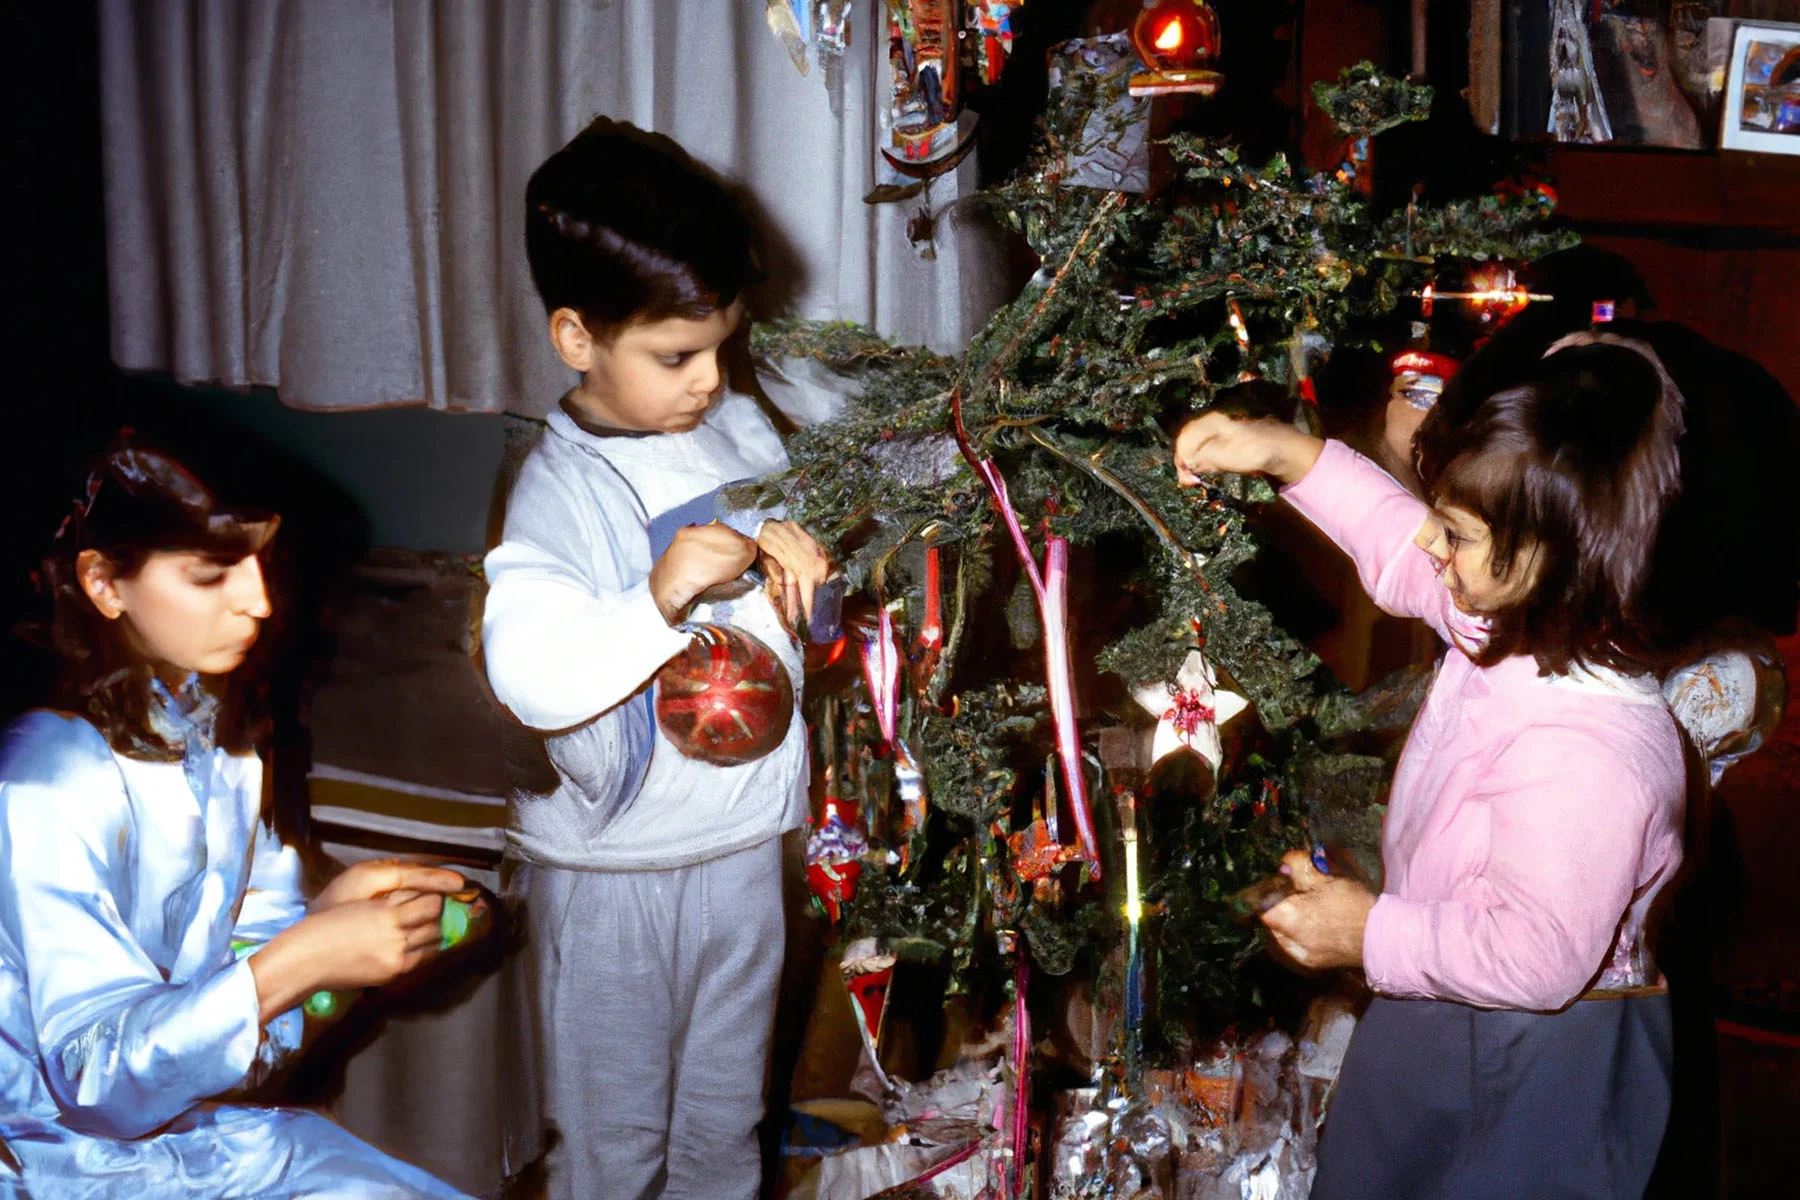 An image that looks like a photograph but is created with the use of Artificial Intelligence. The image has a 90s feel, showing a candid scene of a girl and a boy decorating a Christmas tree in a house. Their mother is sitting next to them and helping them.